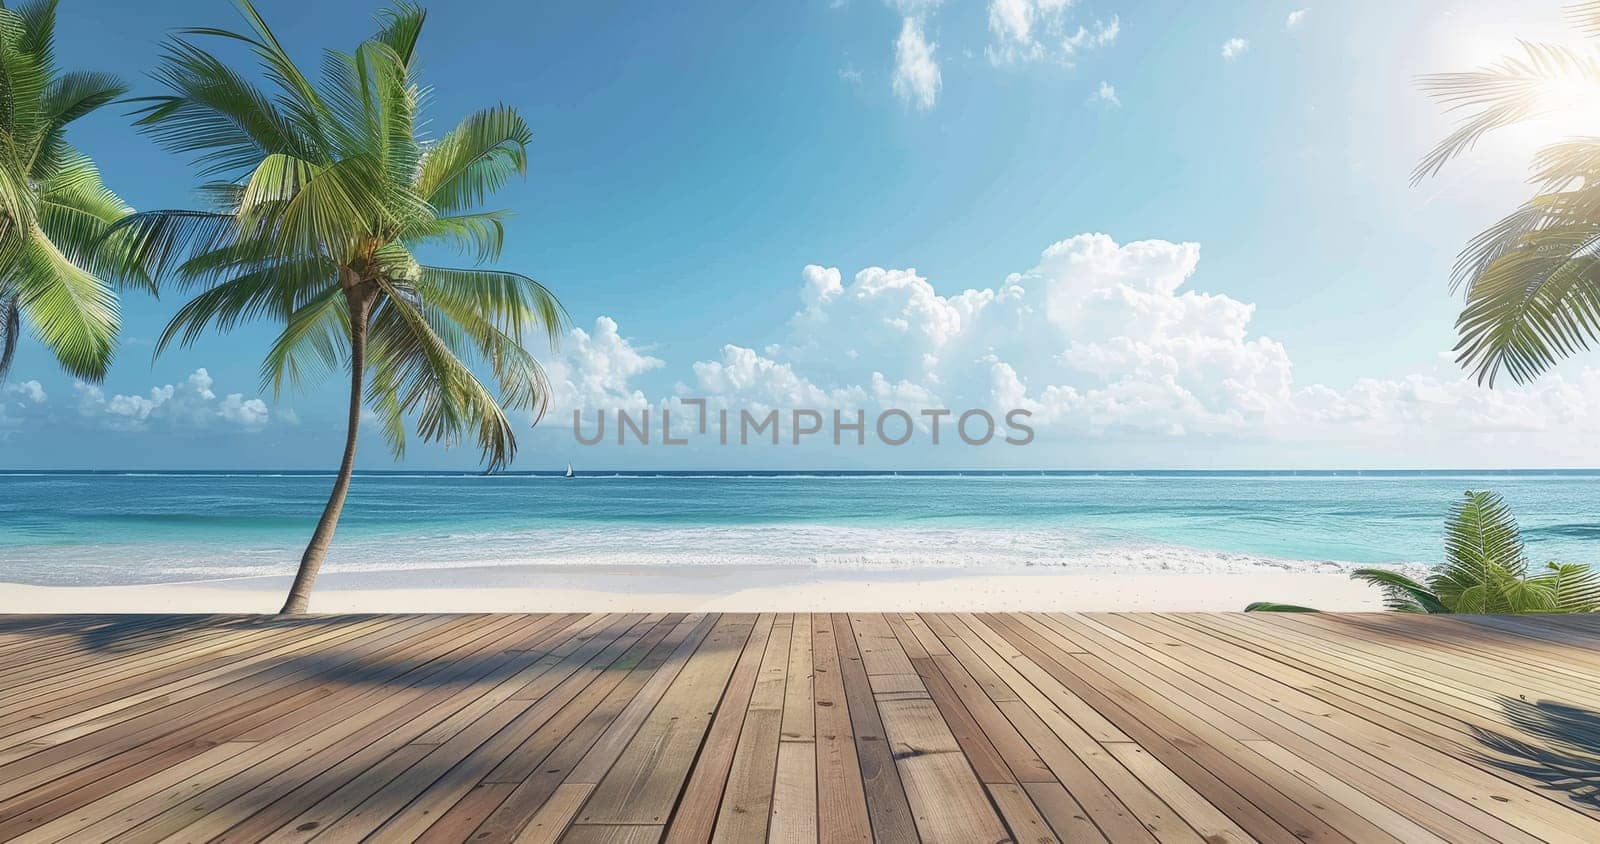 A beautiful beach scene with a wooden boardwalk and palm trees by AI generated image.